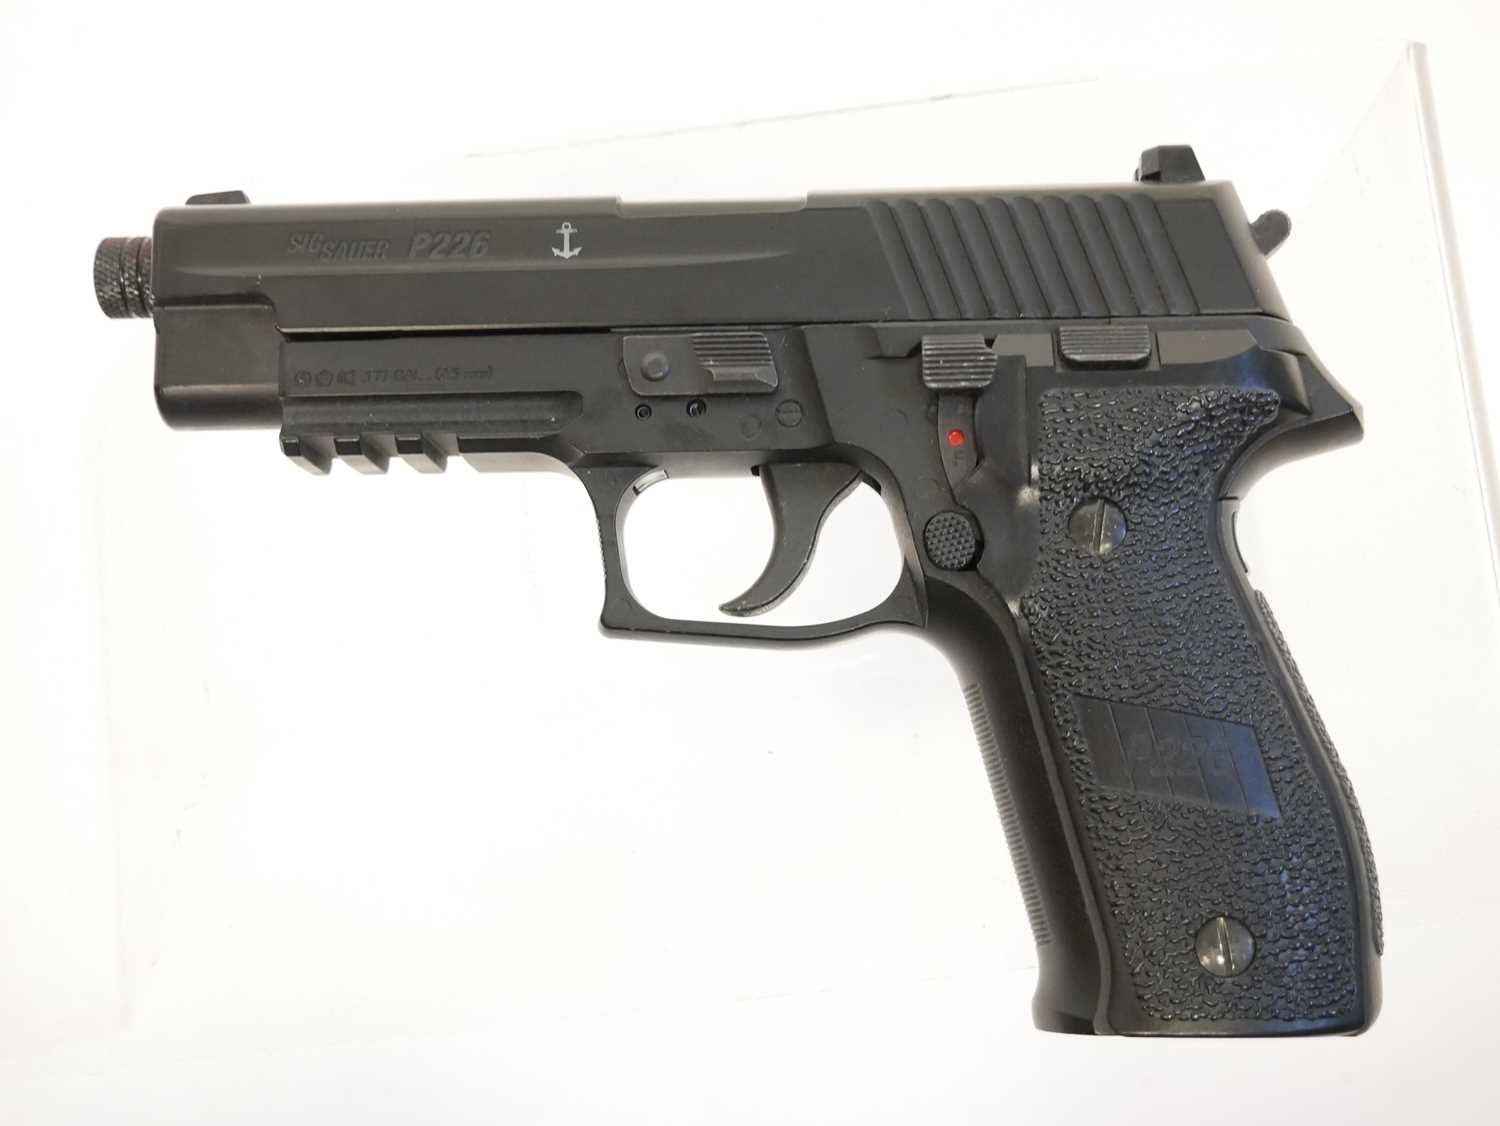 Sig Sauer P226 .177 blowback air pistol serial number 15J04362, with one double-end rotary magazine. - Image 2 of 6